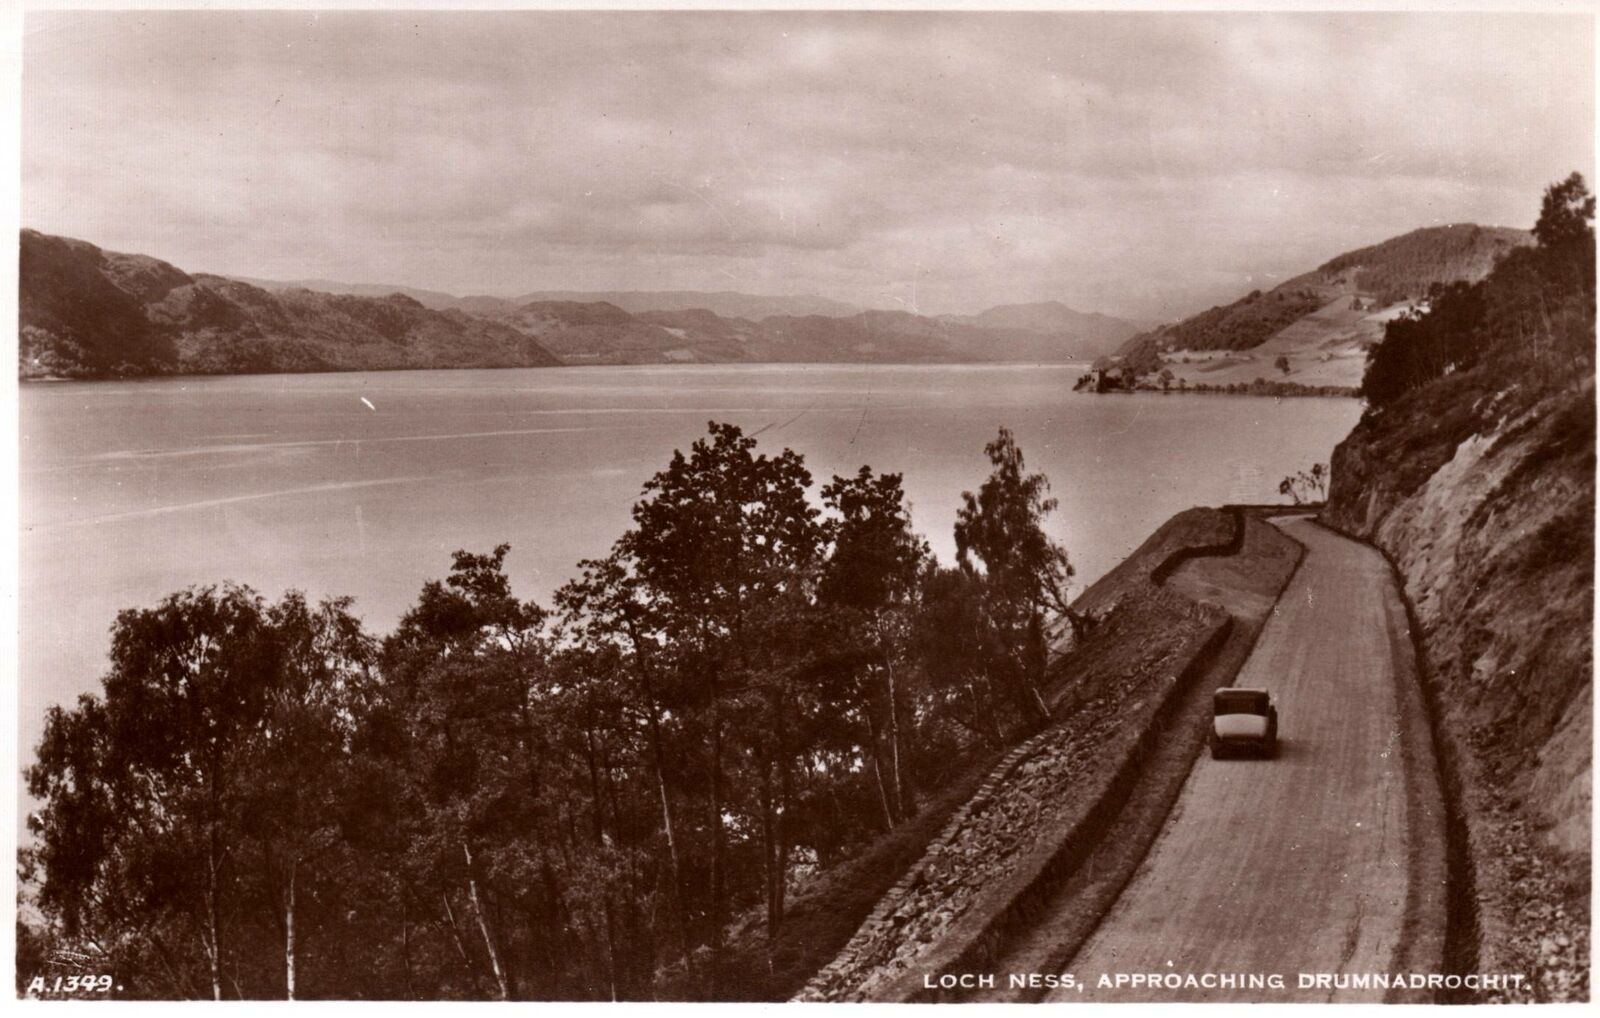 VINTAGE POSTCARD LOCH NESS APPROACHING DRUMNADROUGHT REAL PHOTO c. 1930-1936